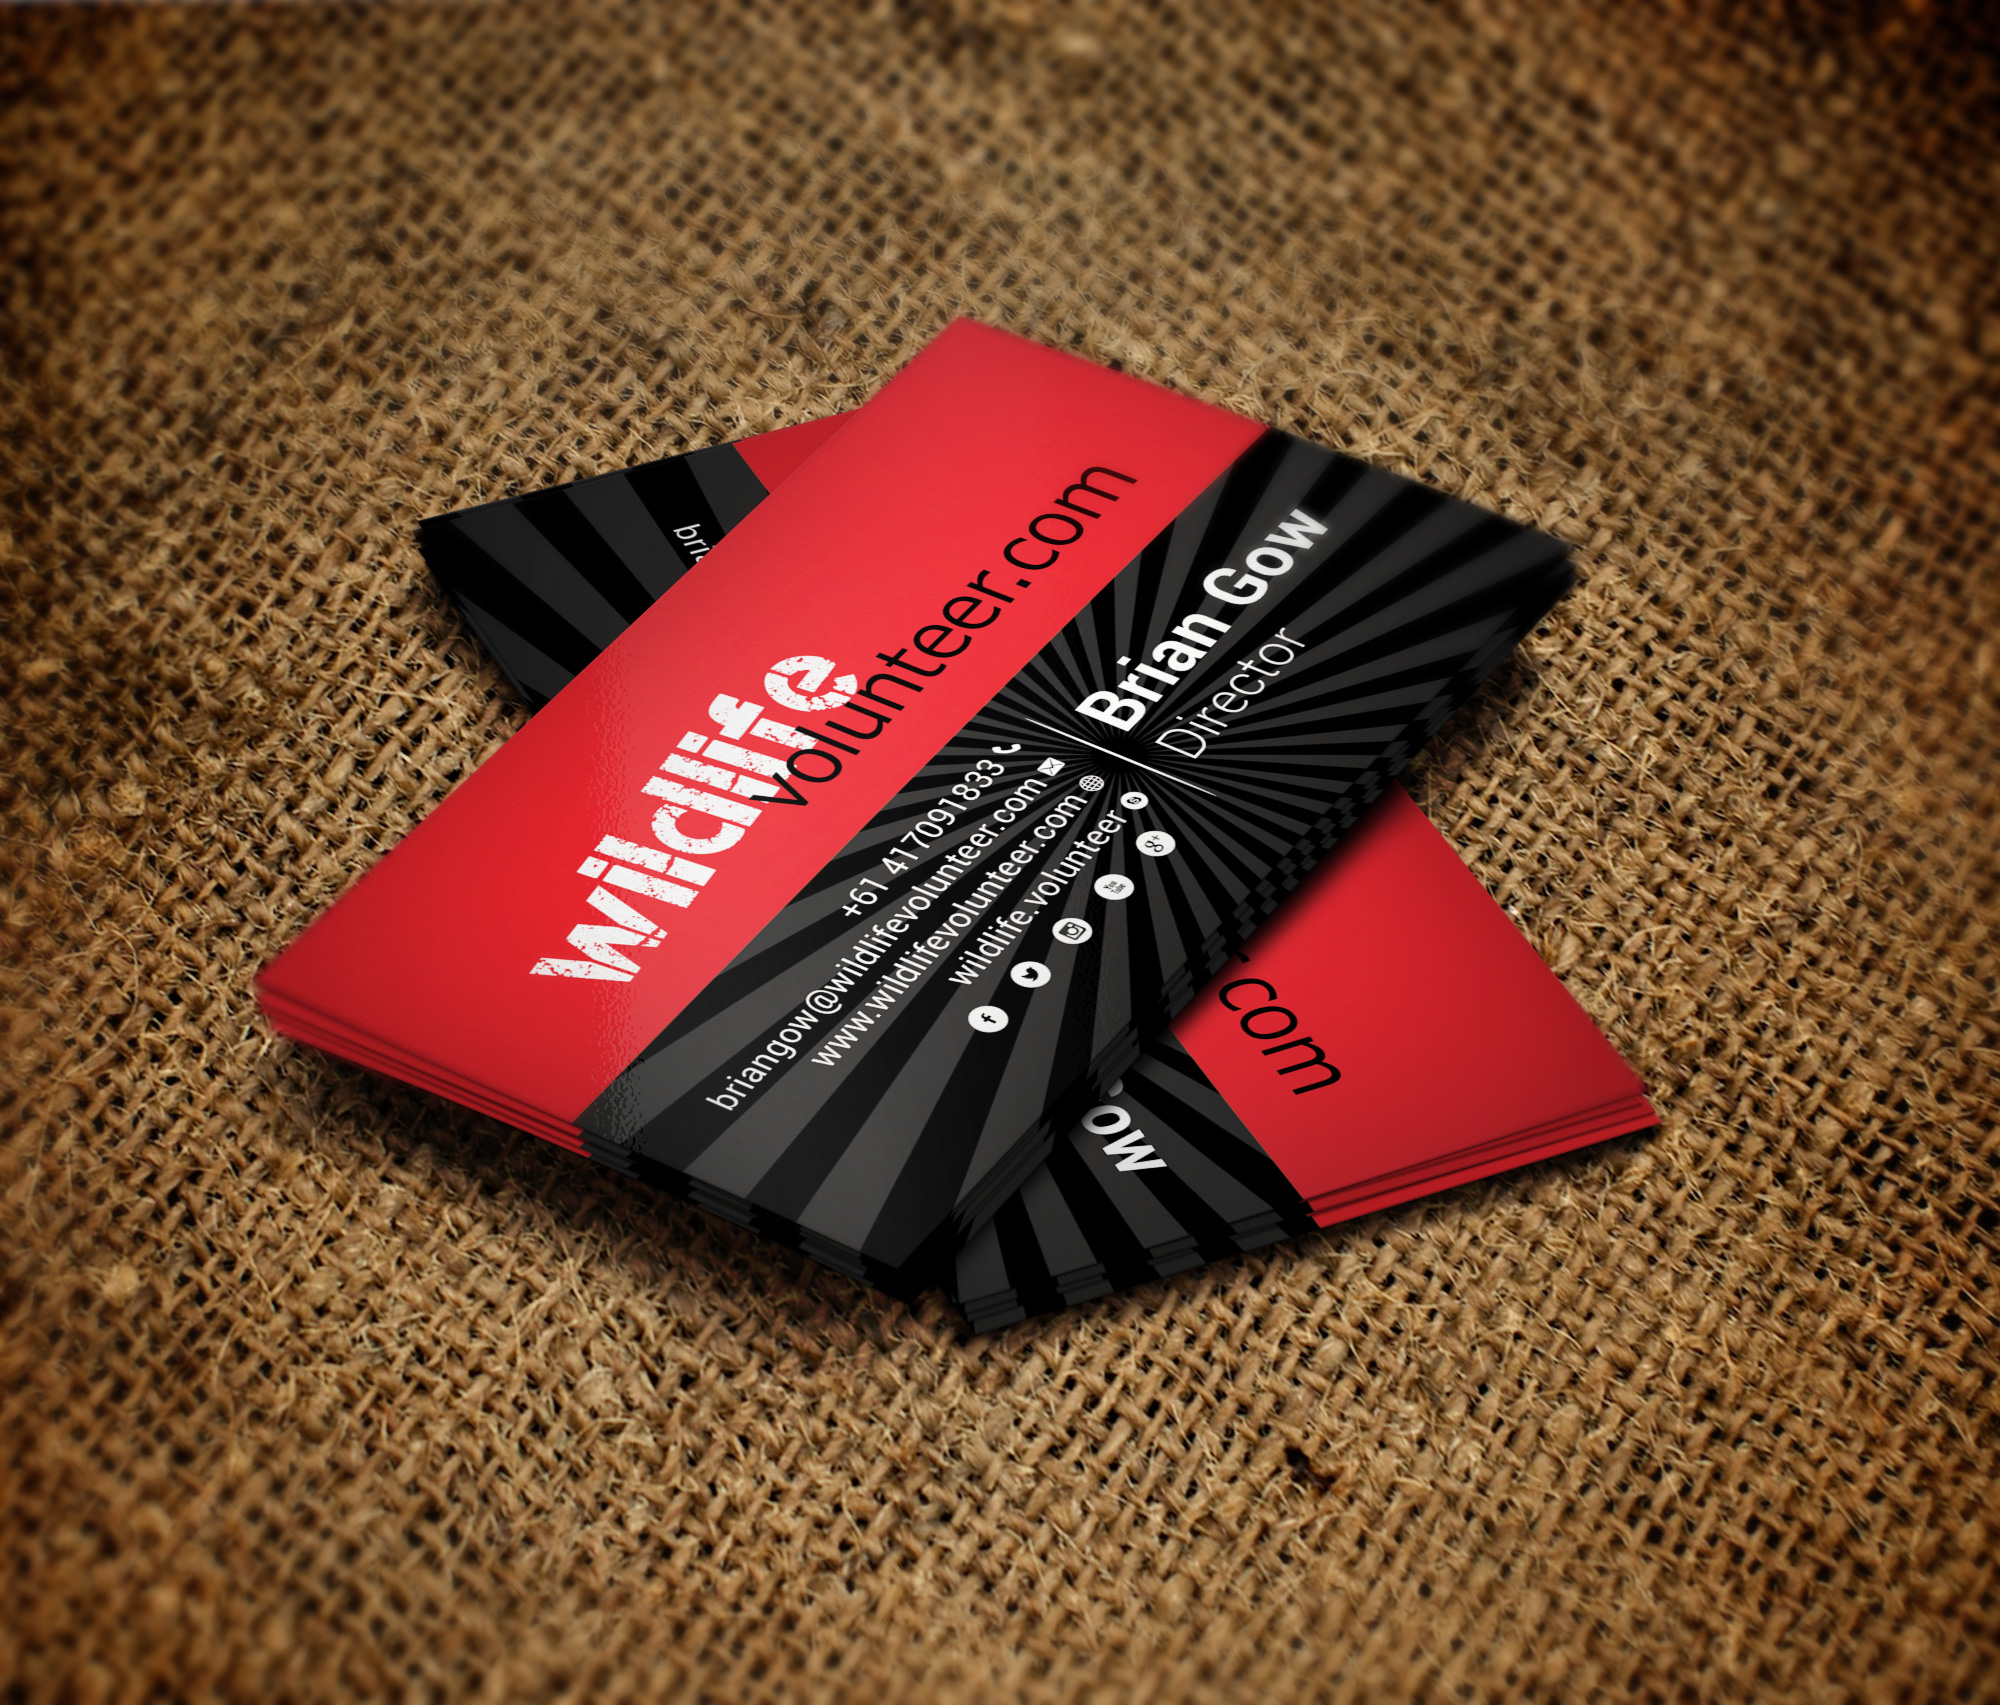 Design Your Professional And Attractive Business Card